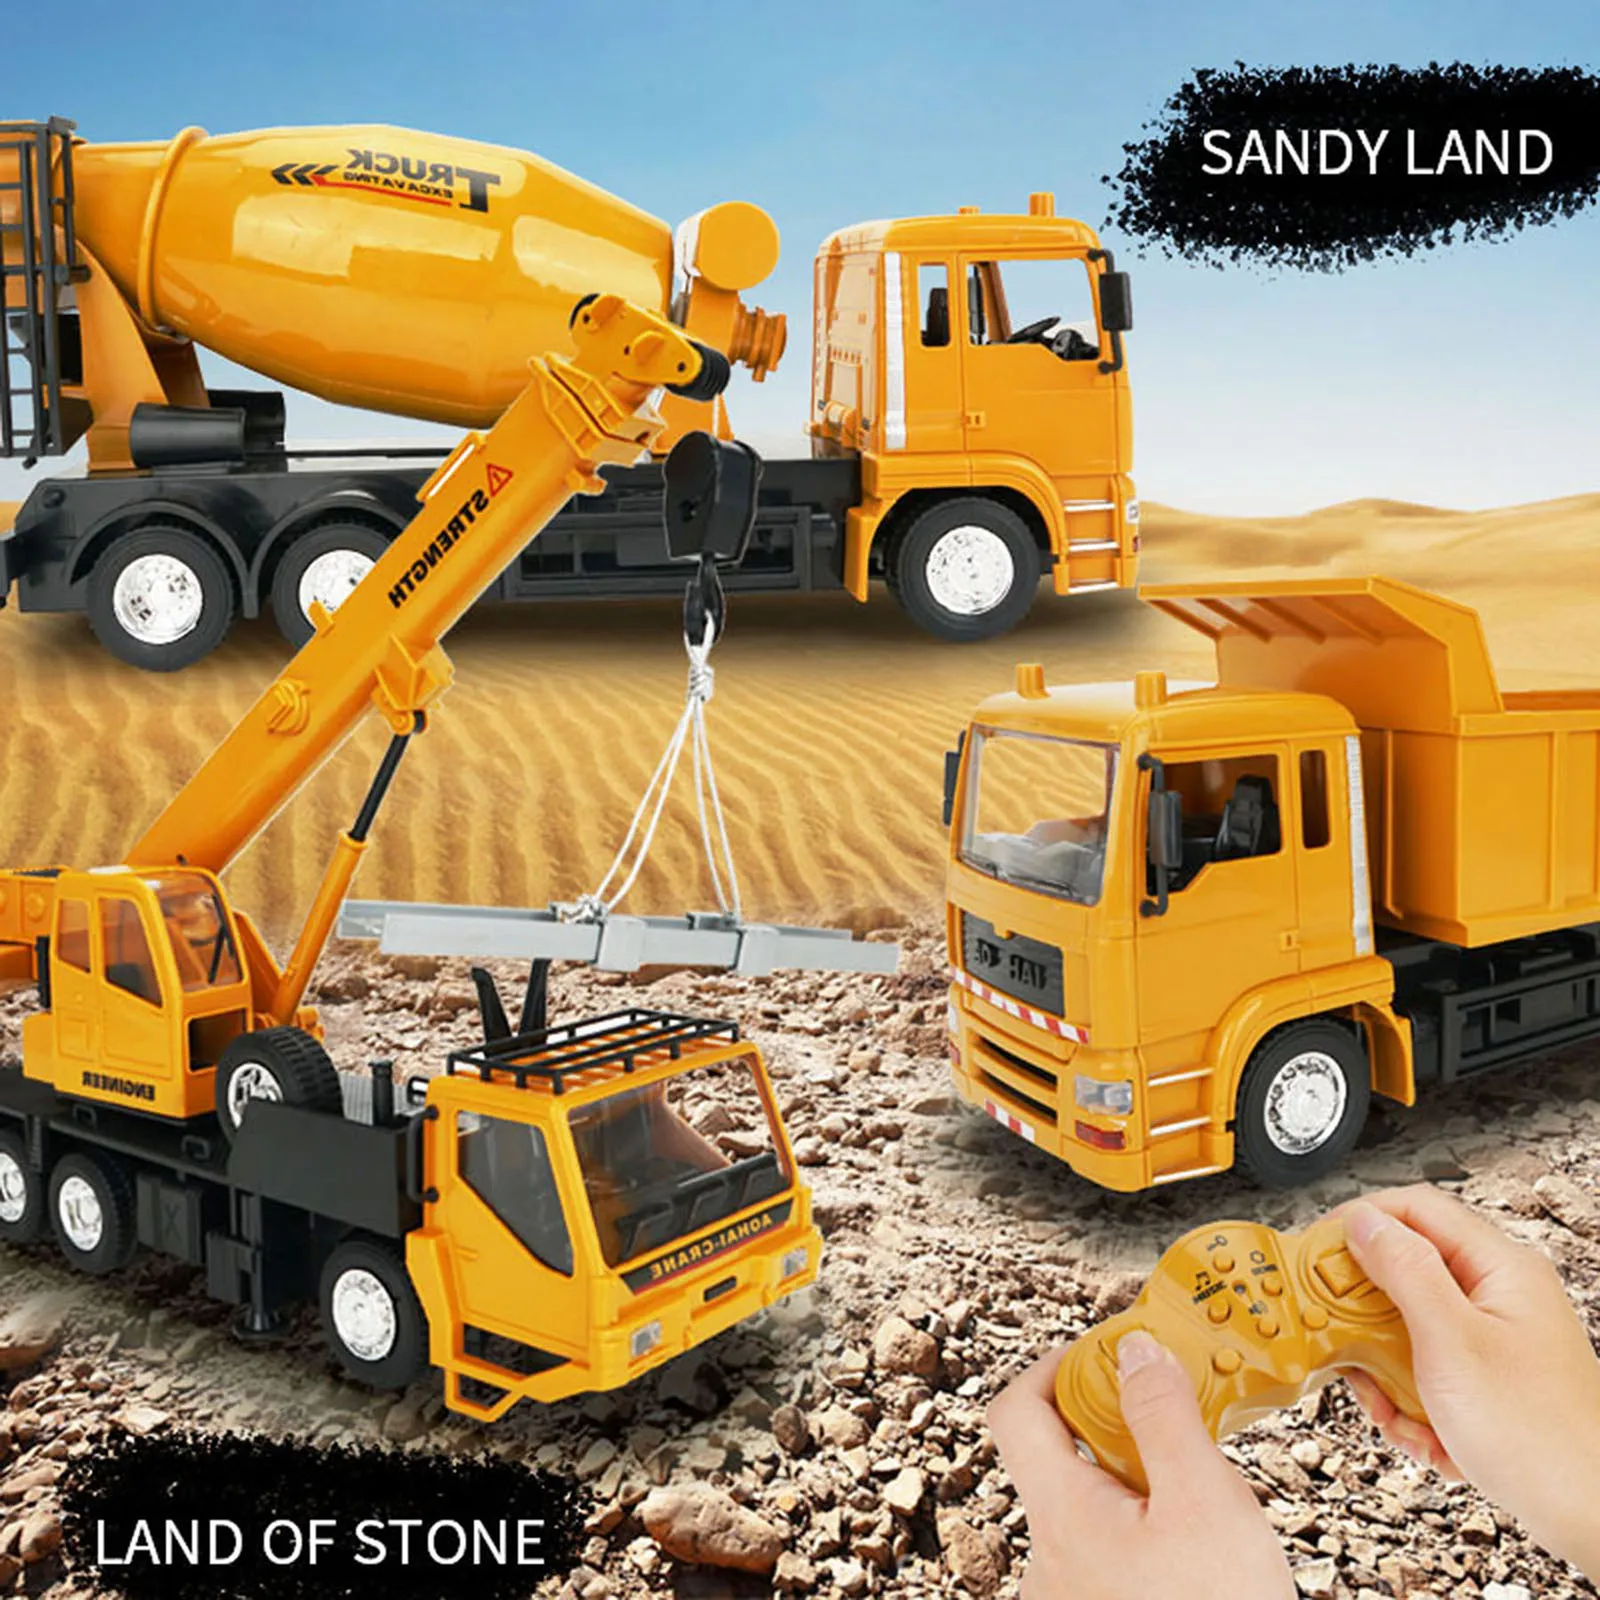 Heavy Duty Truck Remote Engineering RC Car Rechargeable Dump Truck Vehicle Toys Car Model Loaded Sand Car Toy For Boys Gifts enlarge